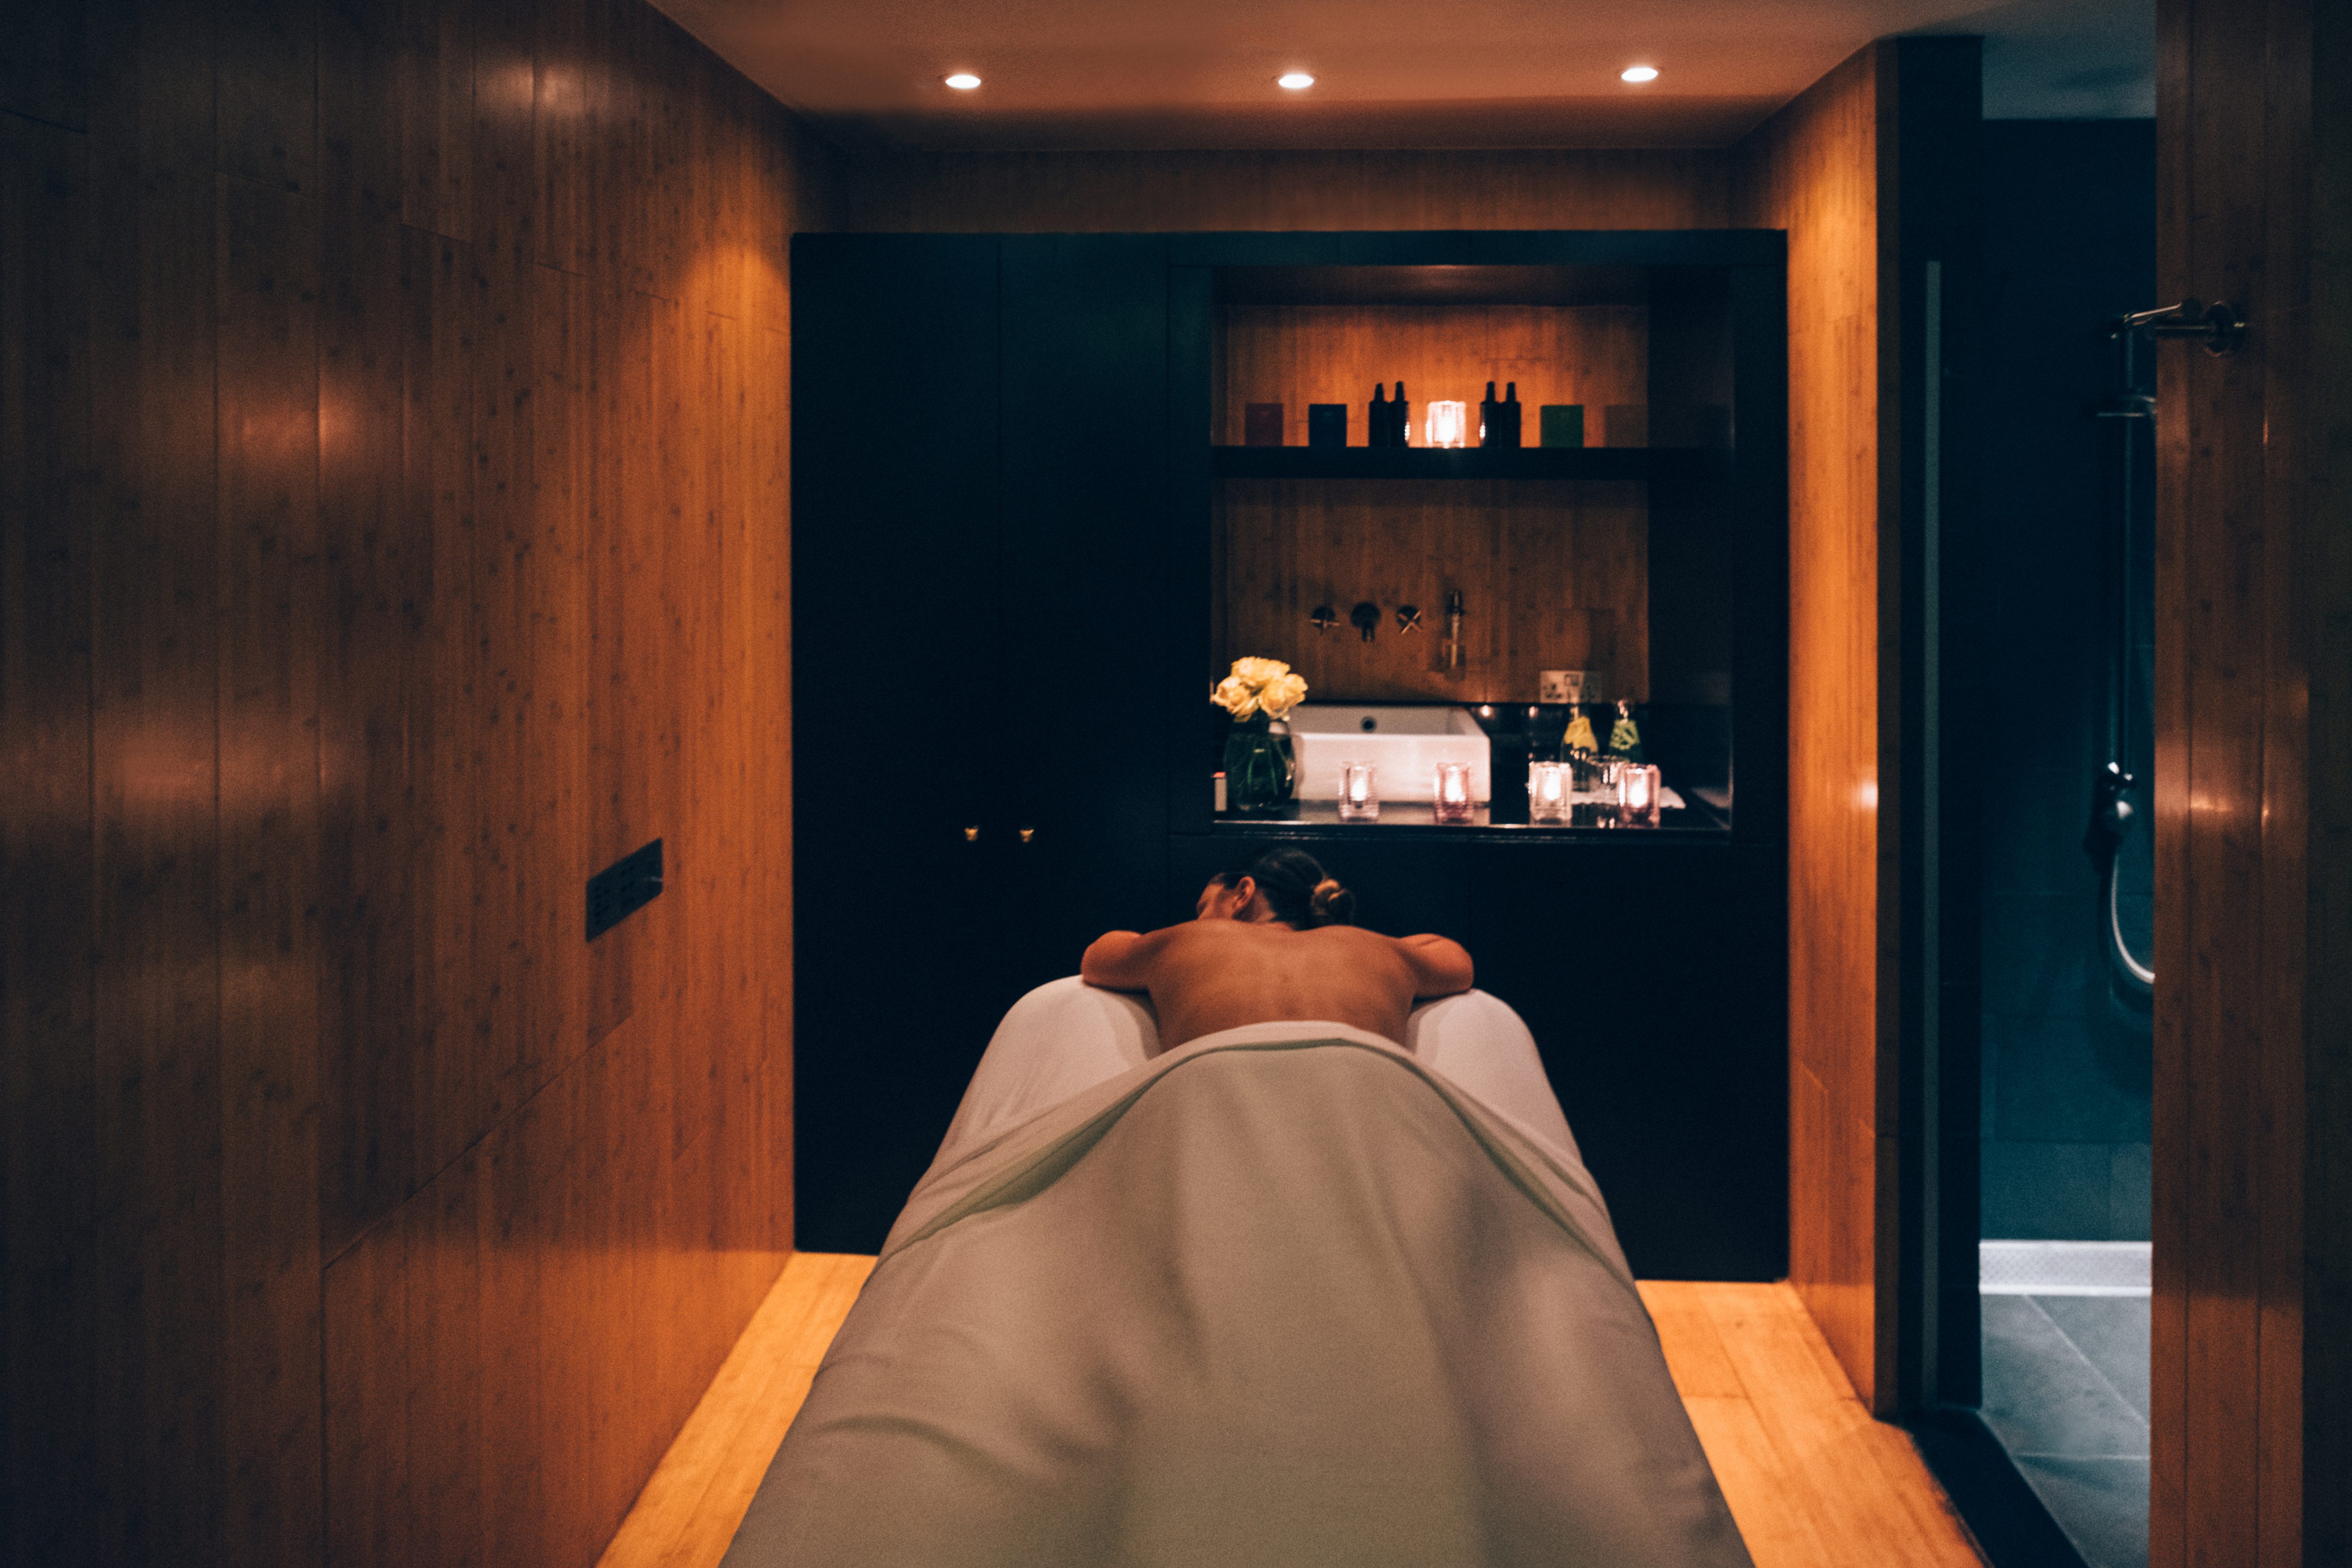 A treatment room at Sense, the Rosewood hotel’s spa